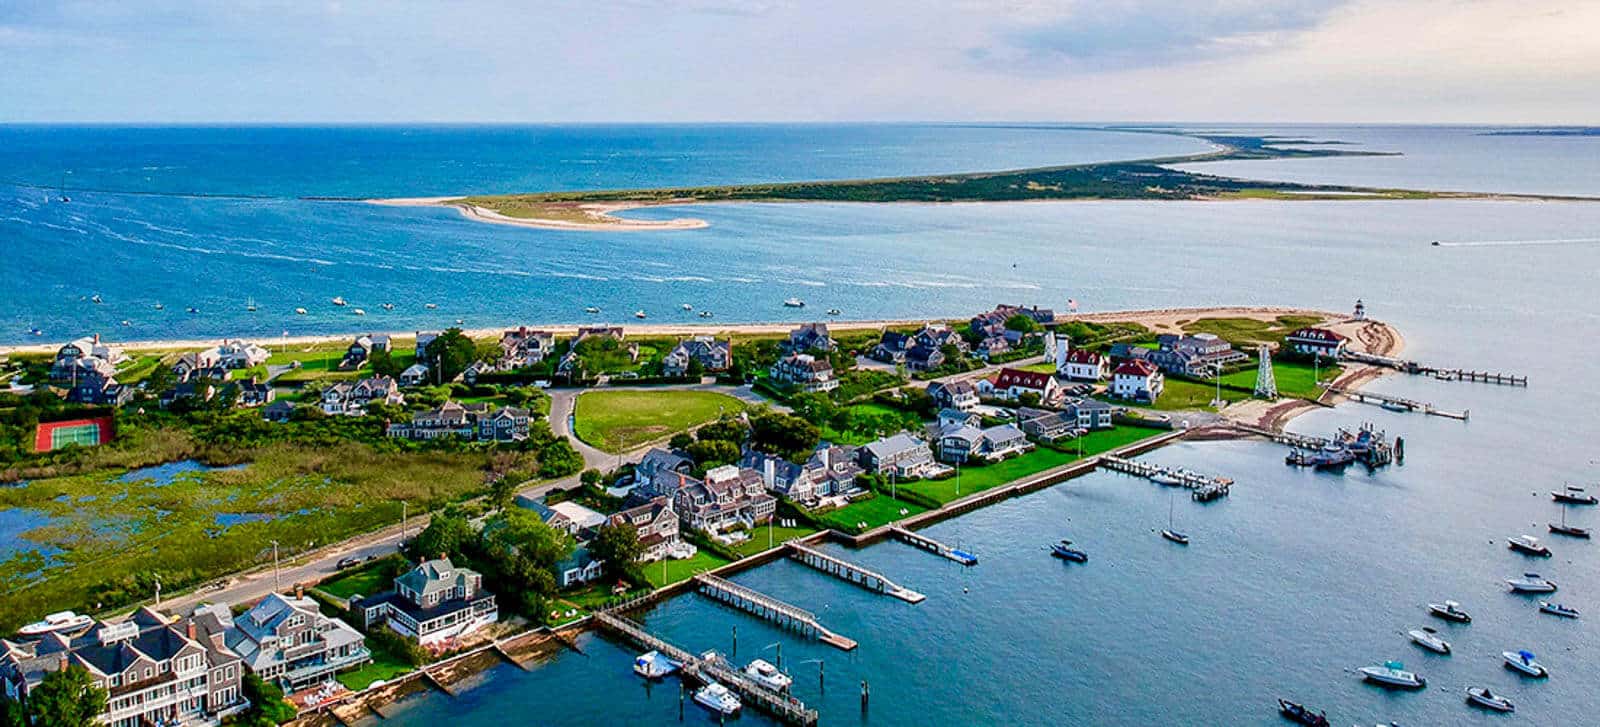 Aerial View of Nantucket